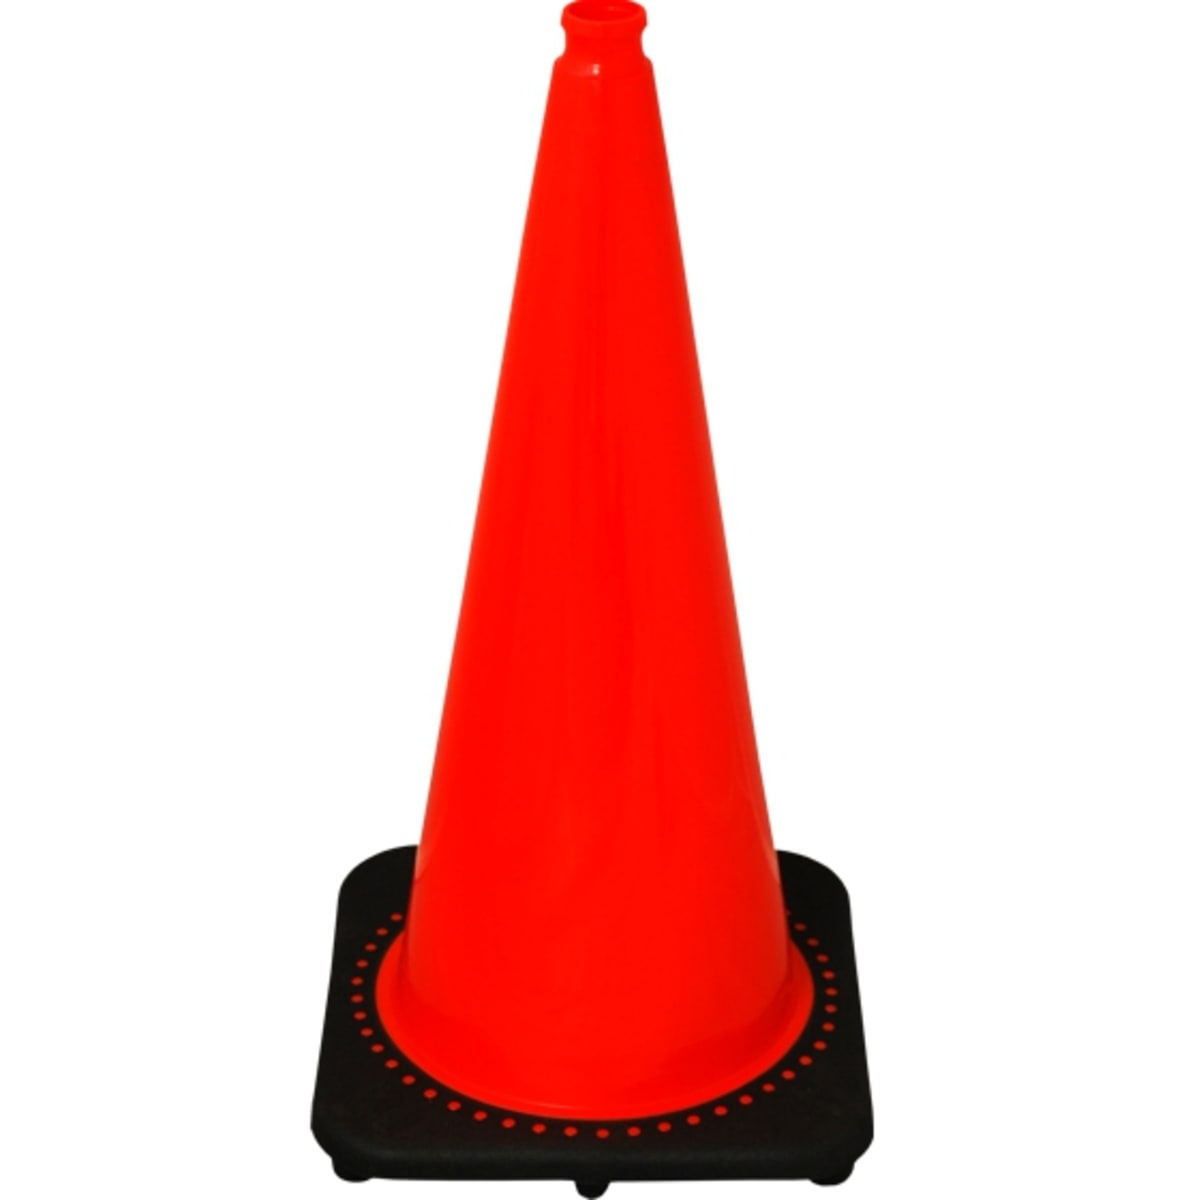 Rayfarmo 28 Inch Traffic Safety Cones,12 Pack Orange PVC Road Parking Cones Driveway Road Parking Unbreakable Construction Cone with Reflective Collars for Traffic Control